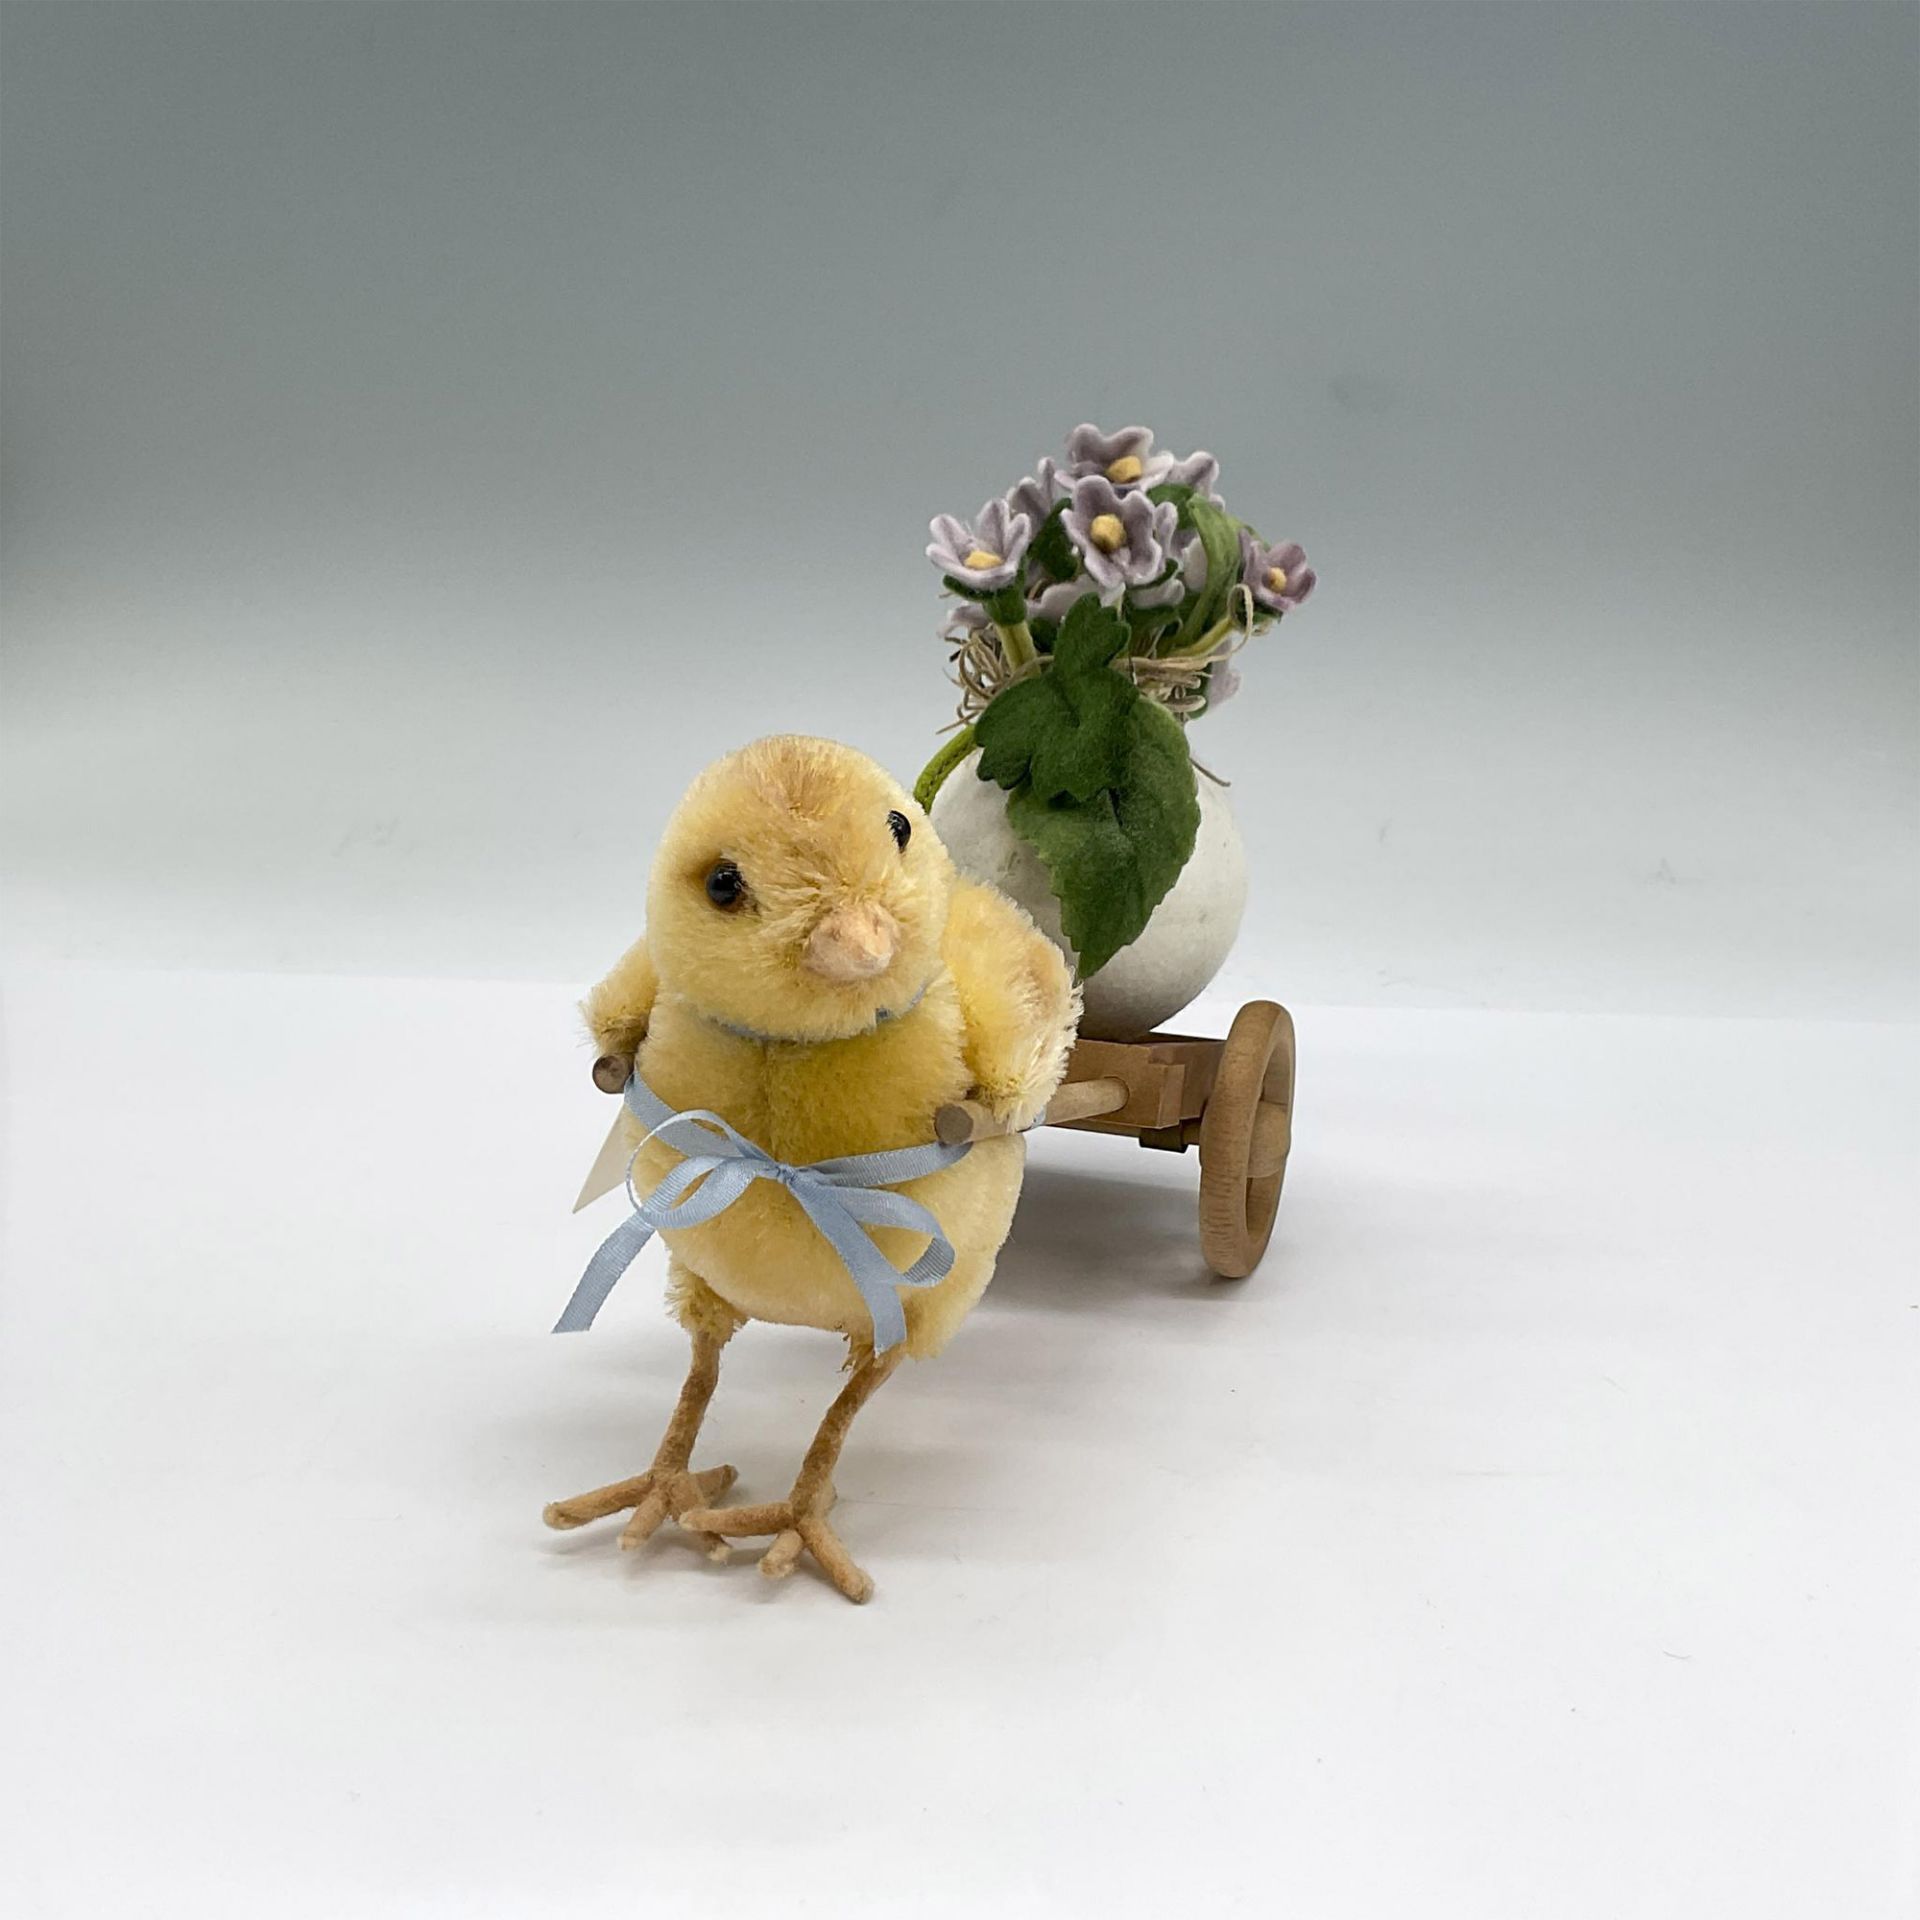 R. John Wright Stuffed Animal, Spring Delivery Chick - Image 2 of 5